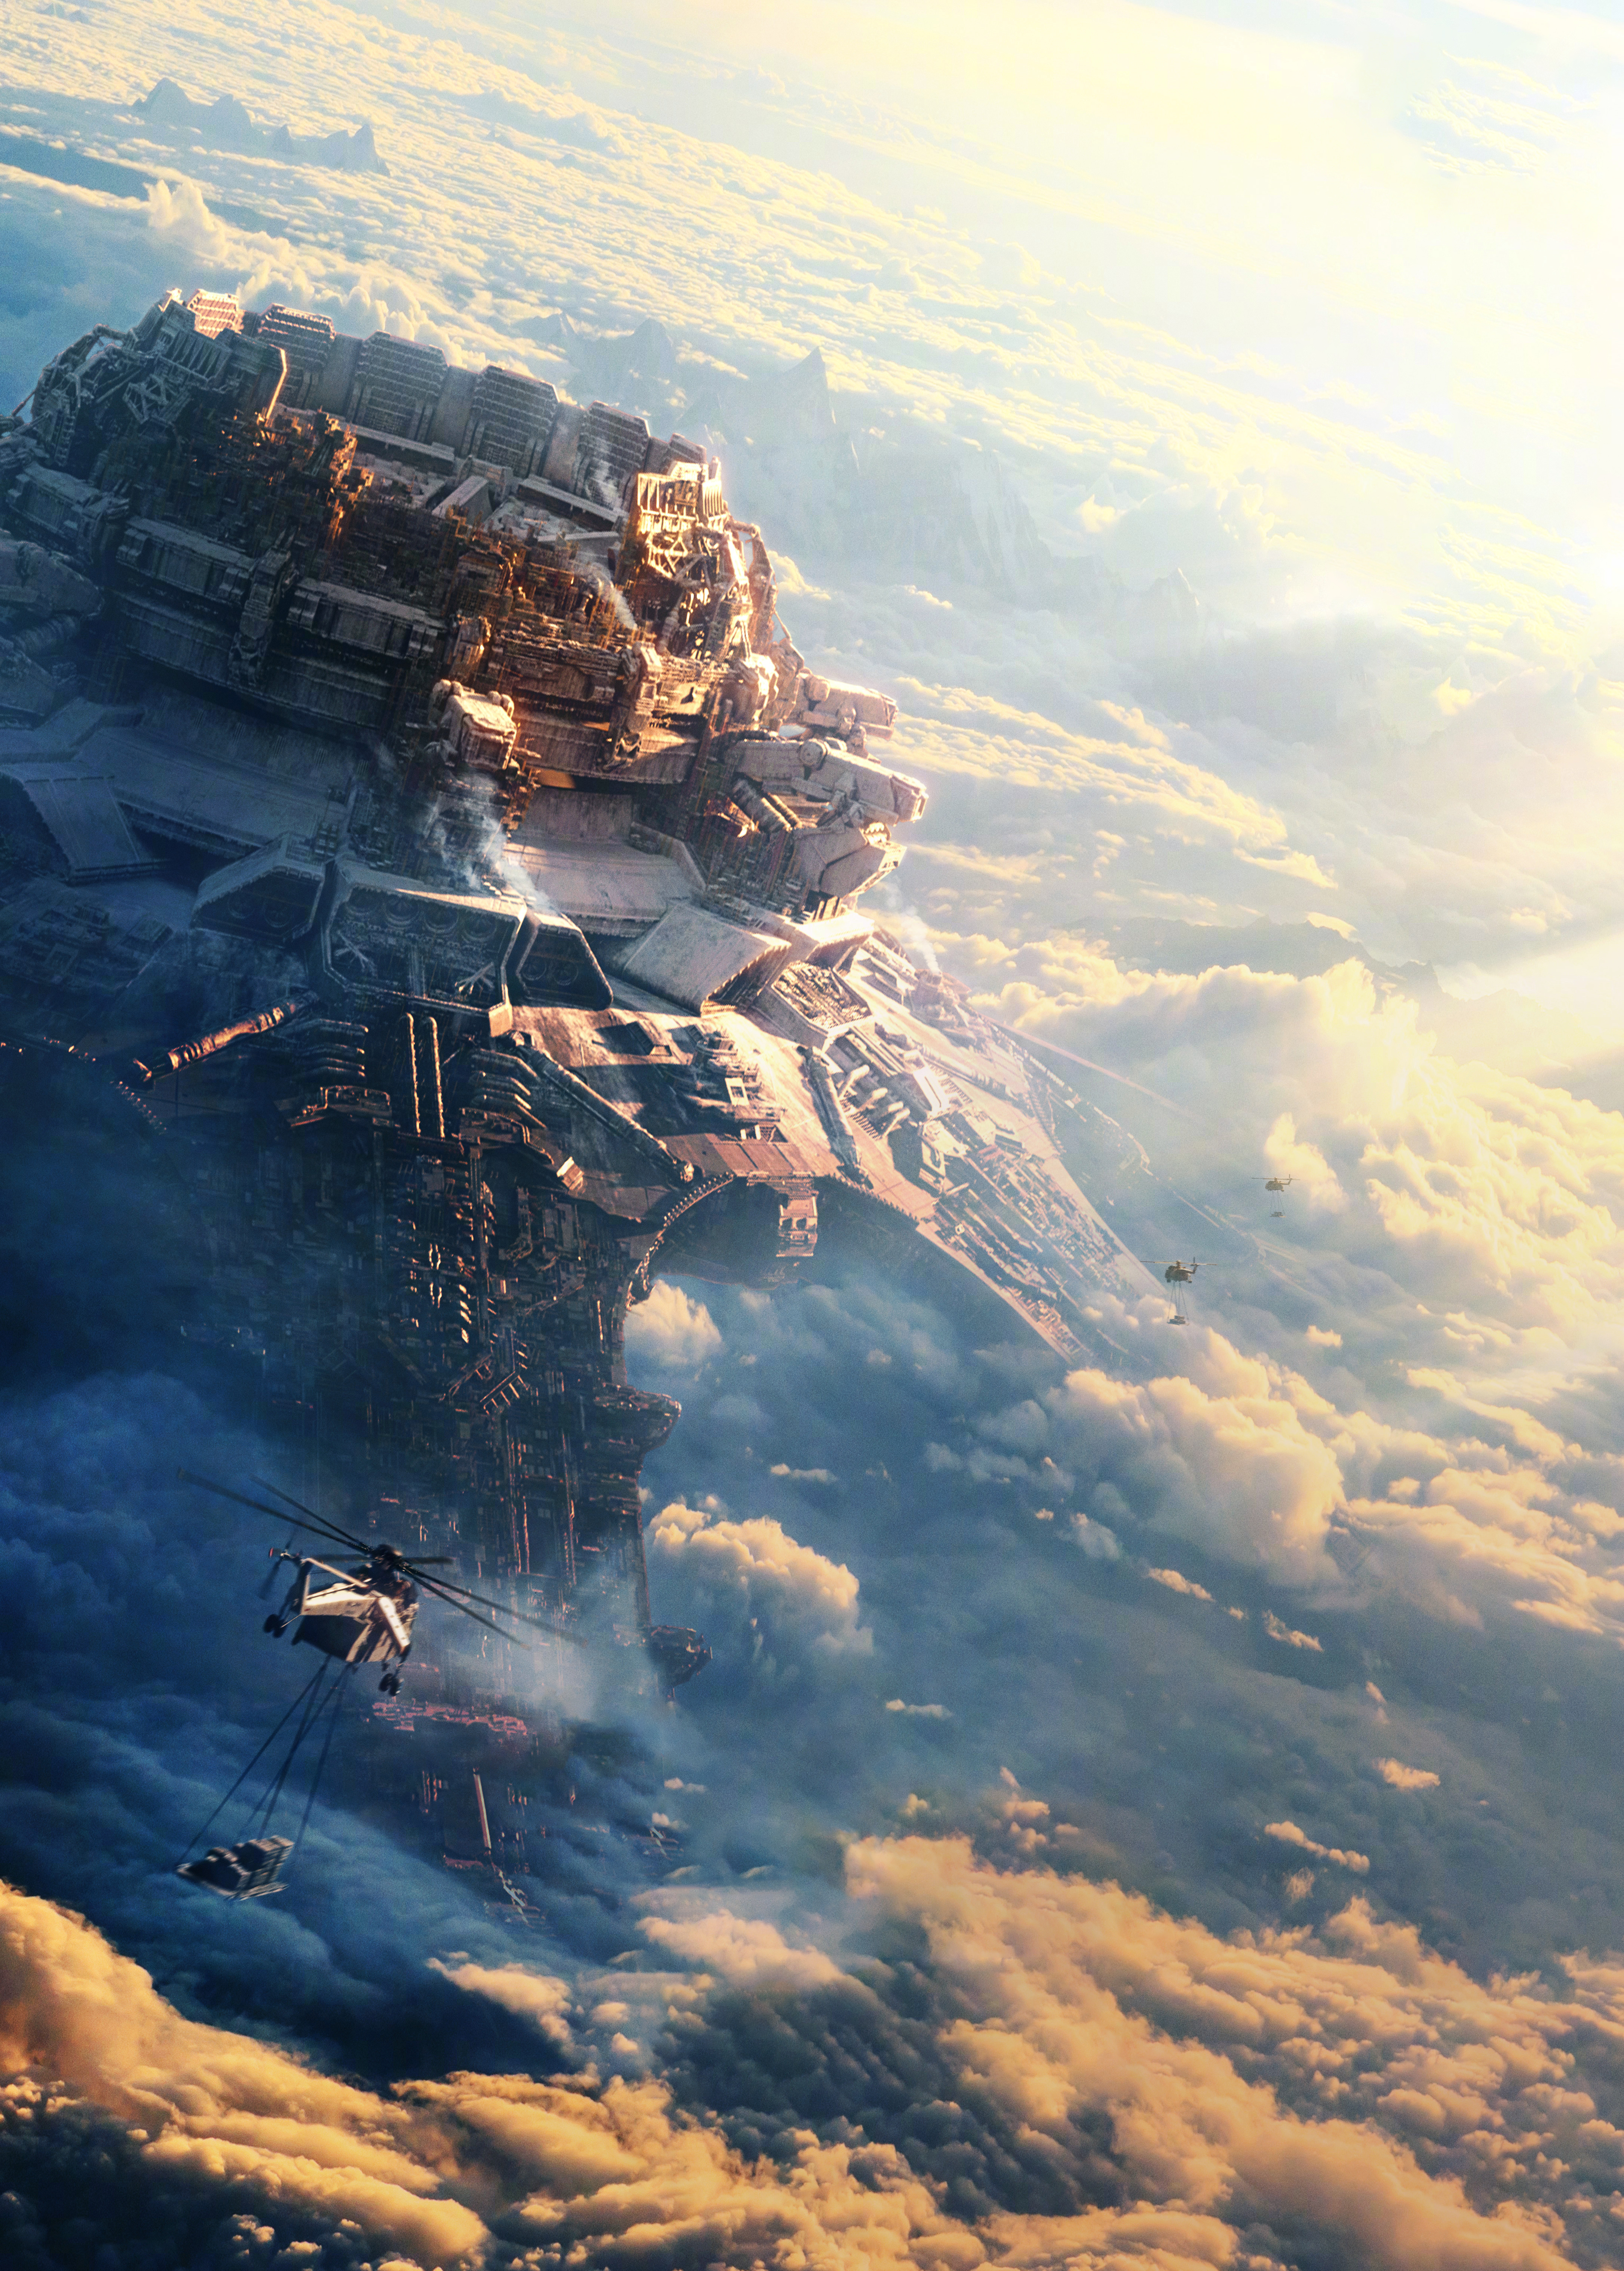 The Wandering Earth 2 Earth Engine Helicopters Vertical Digital Art Futuristic Clouds 4343x6074